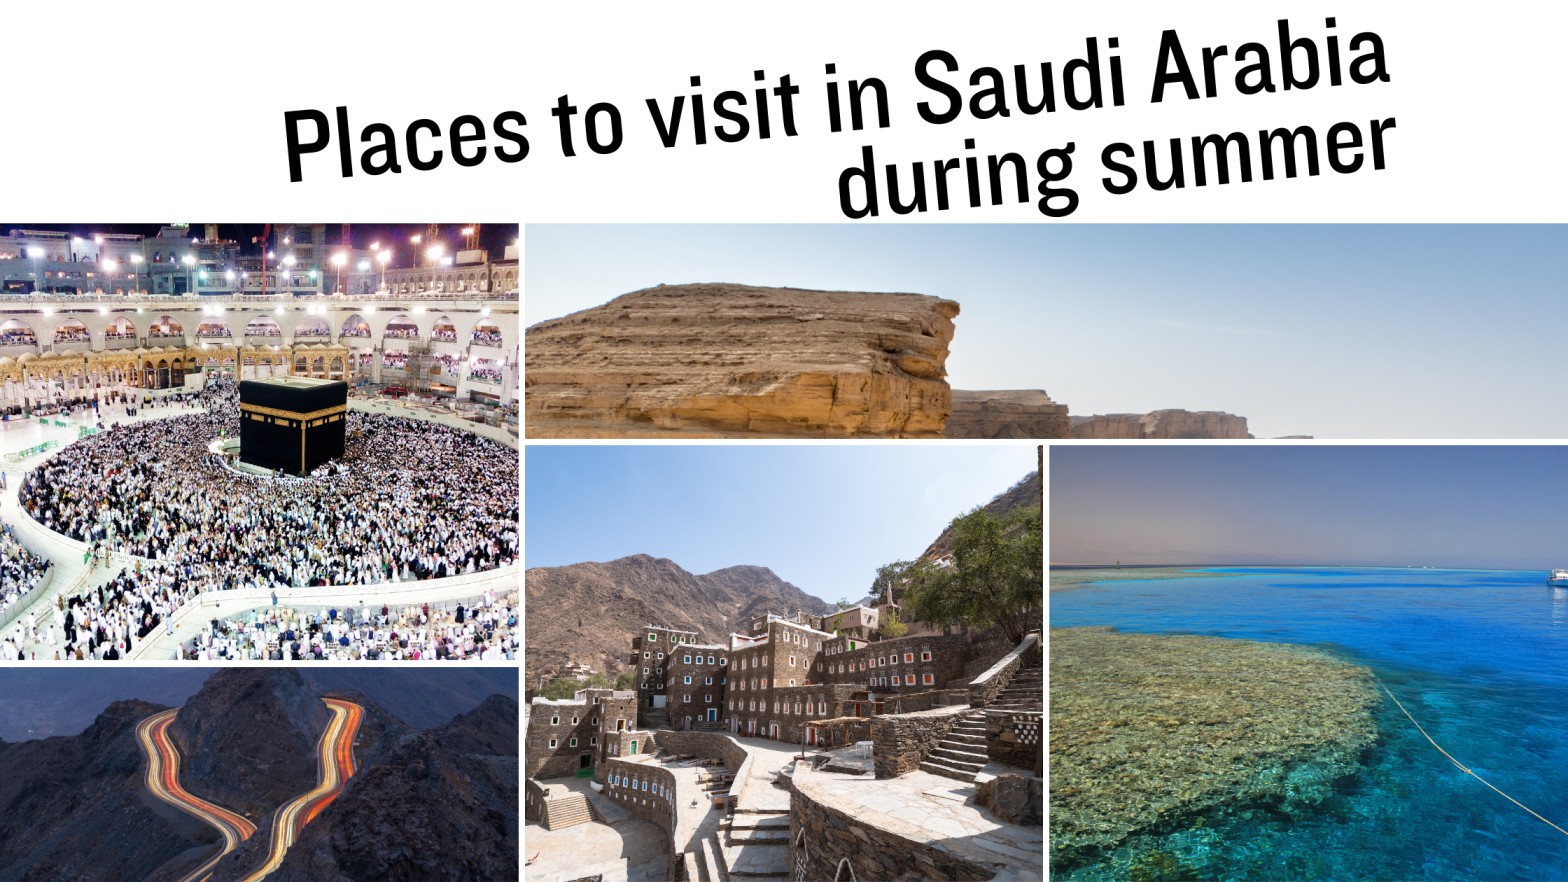 Places to visit in Saudi Arabia during summer